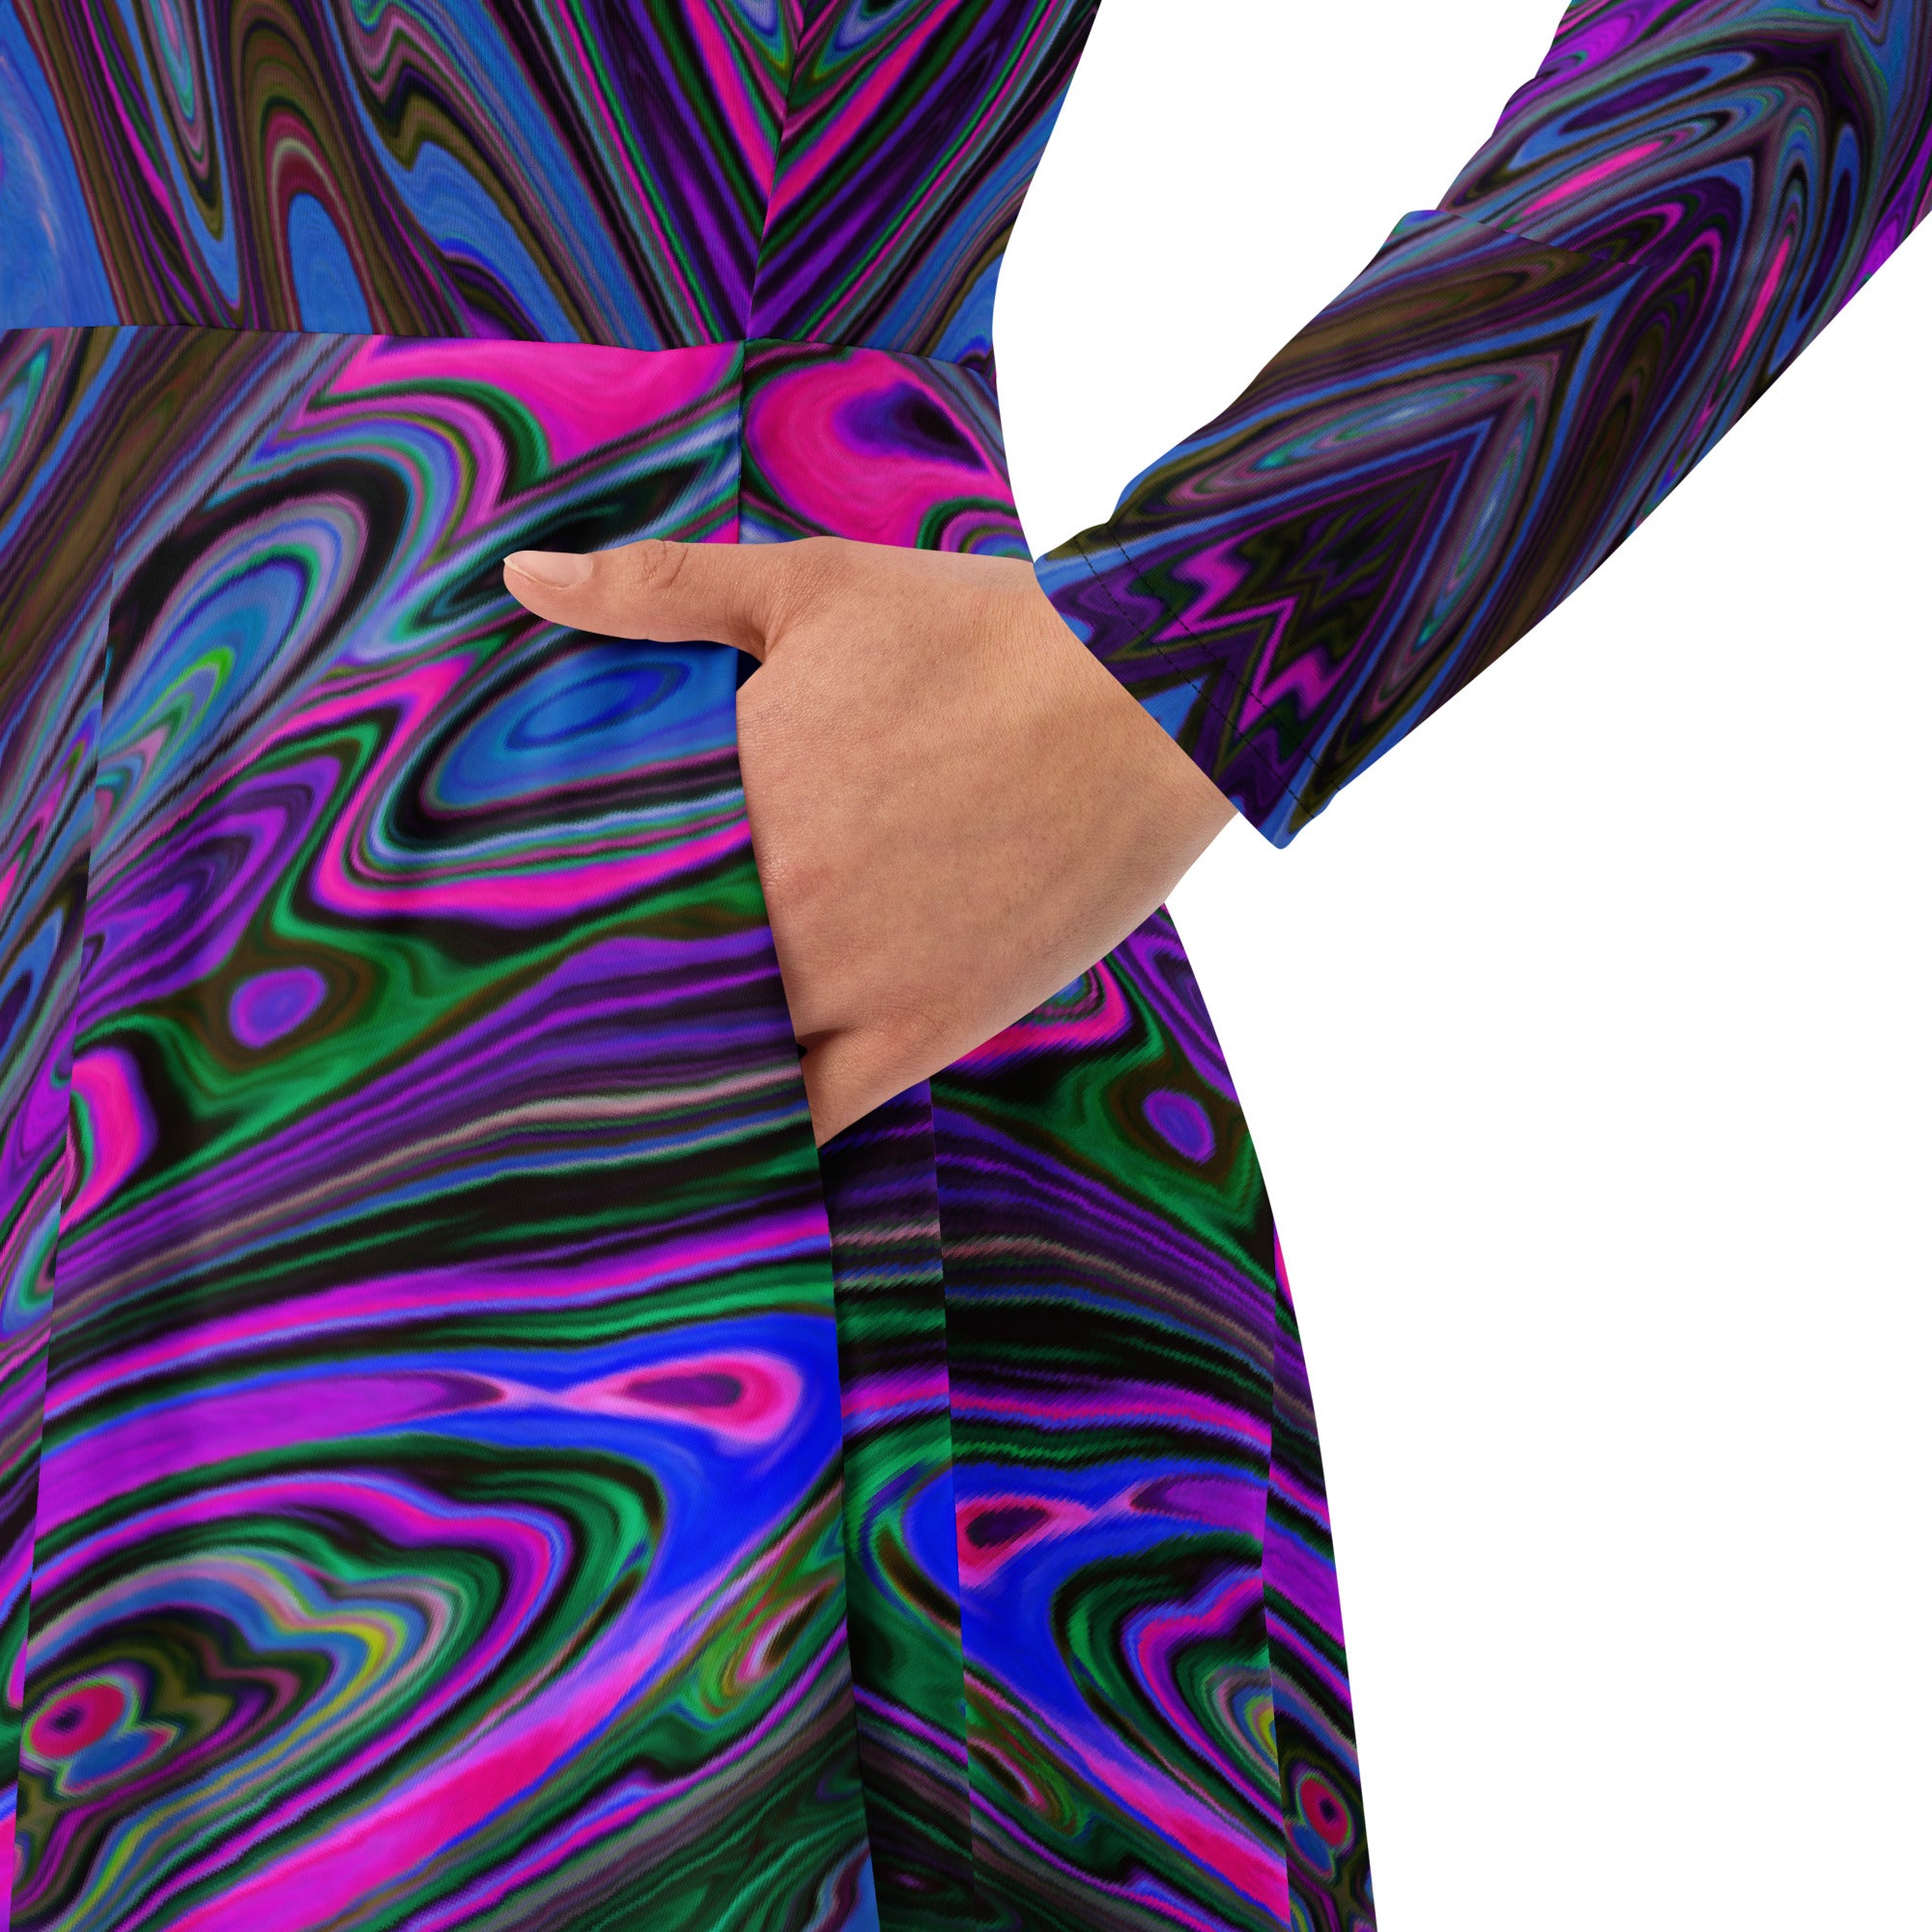 Midi Dress, Trippy Magenta, Blue and Green Abstract Butterfly